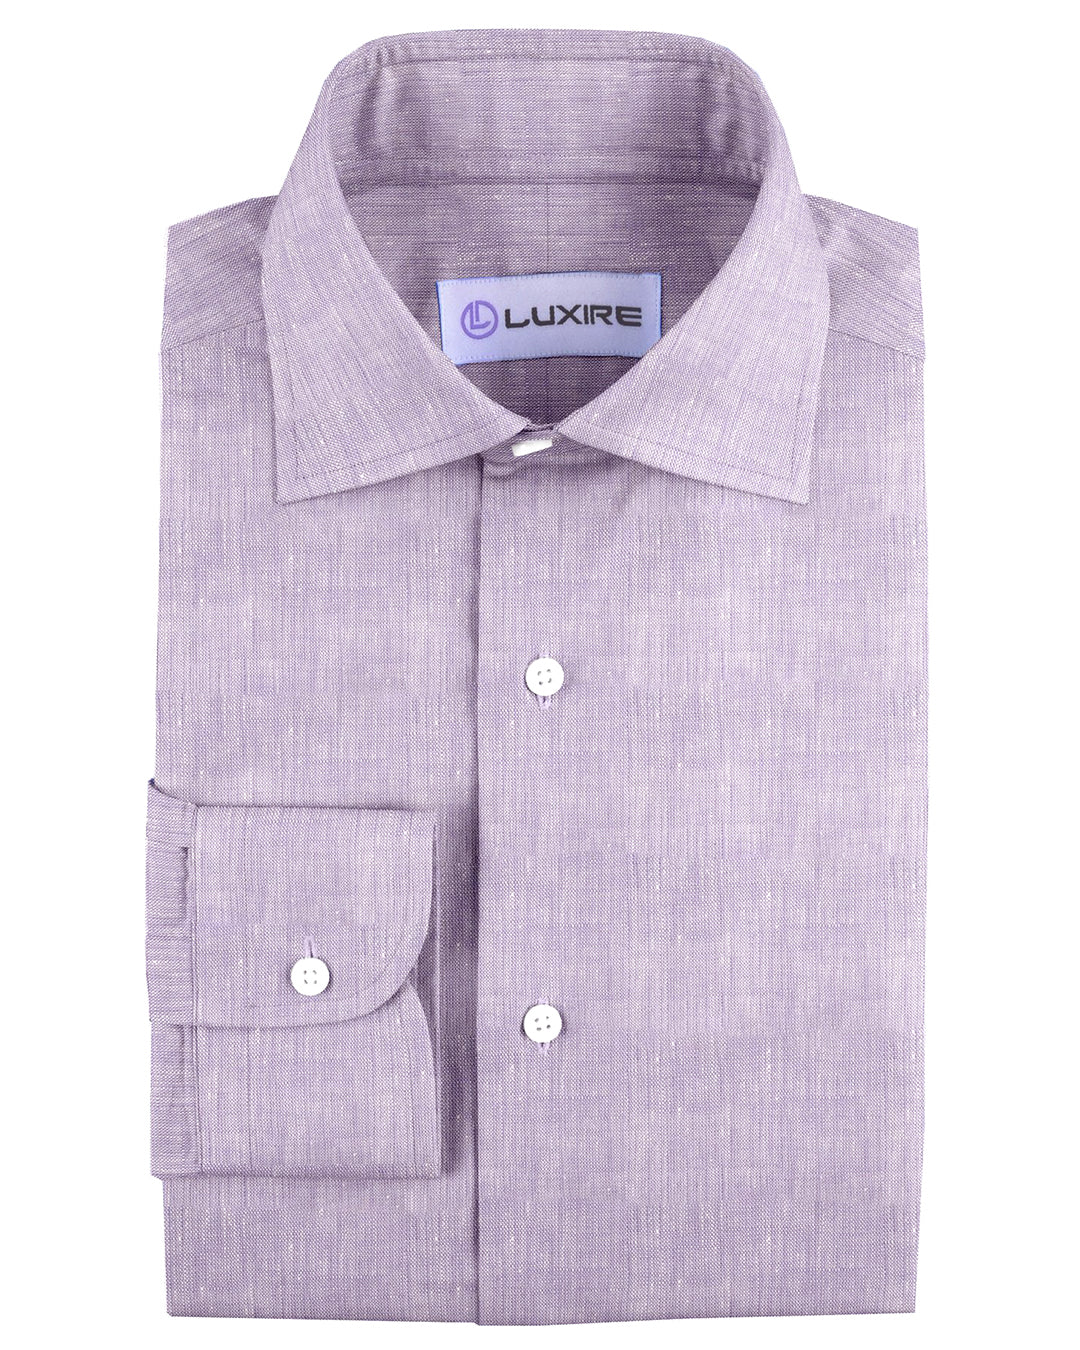 Front of the custom linen shirt for men in light purple by Luxire Clothing